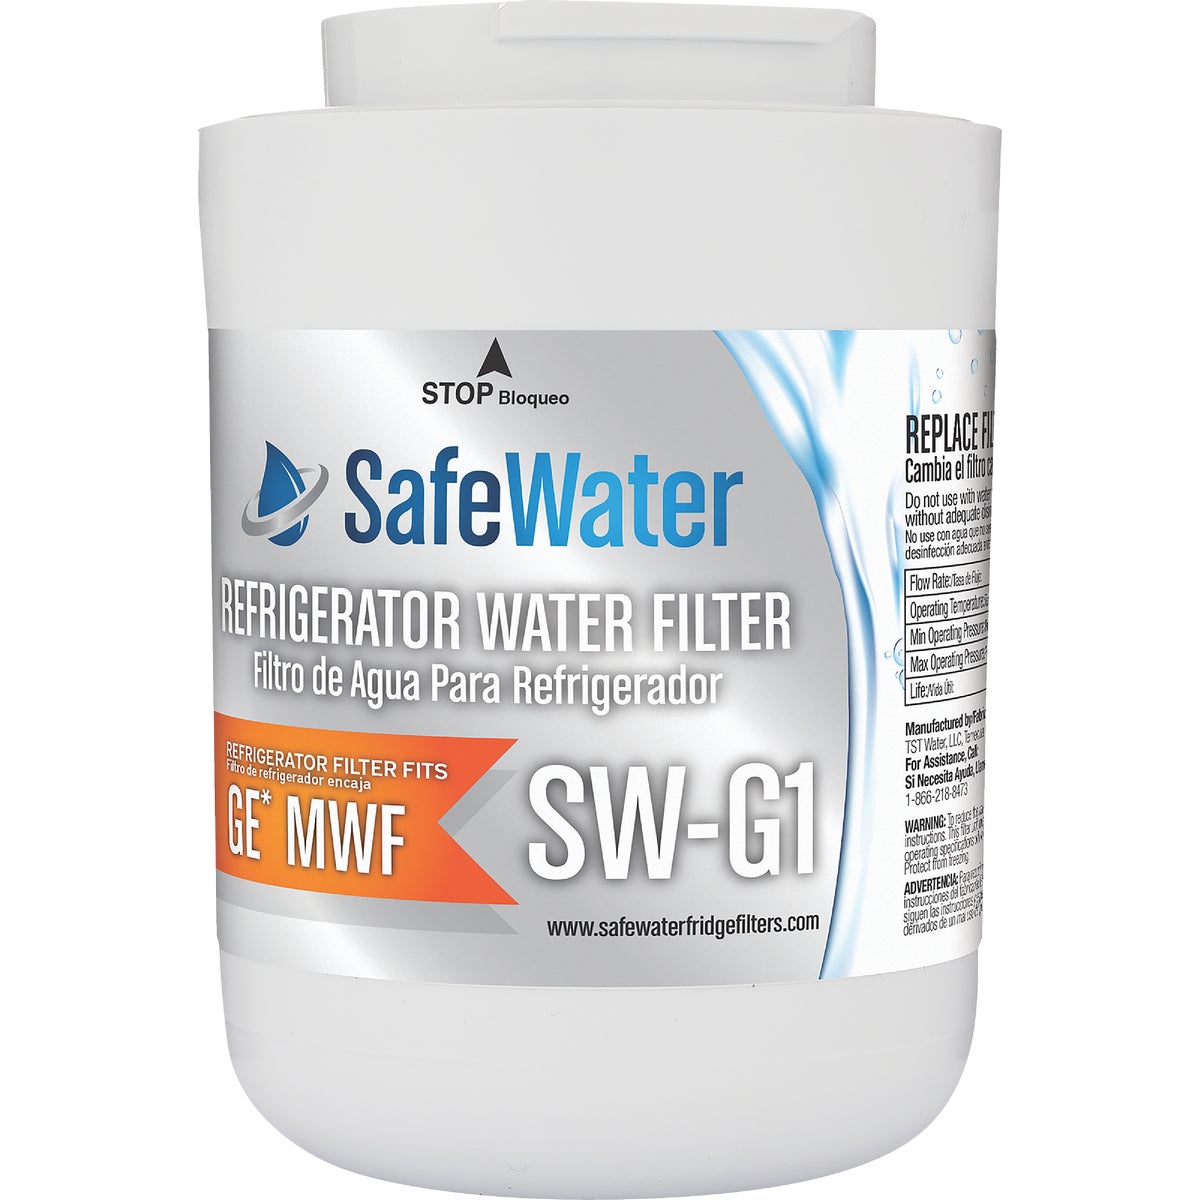 Item 401735, This EarthSmart replacement refrigerator water filter fits in place of GE 